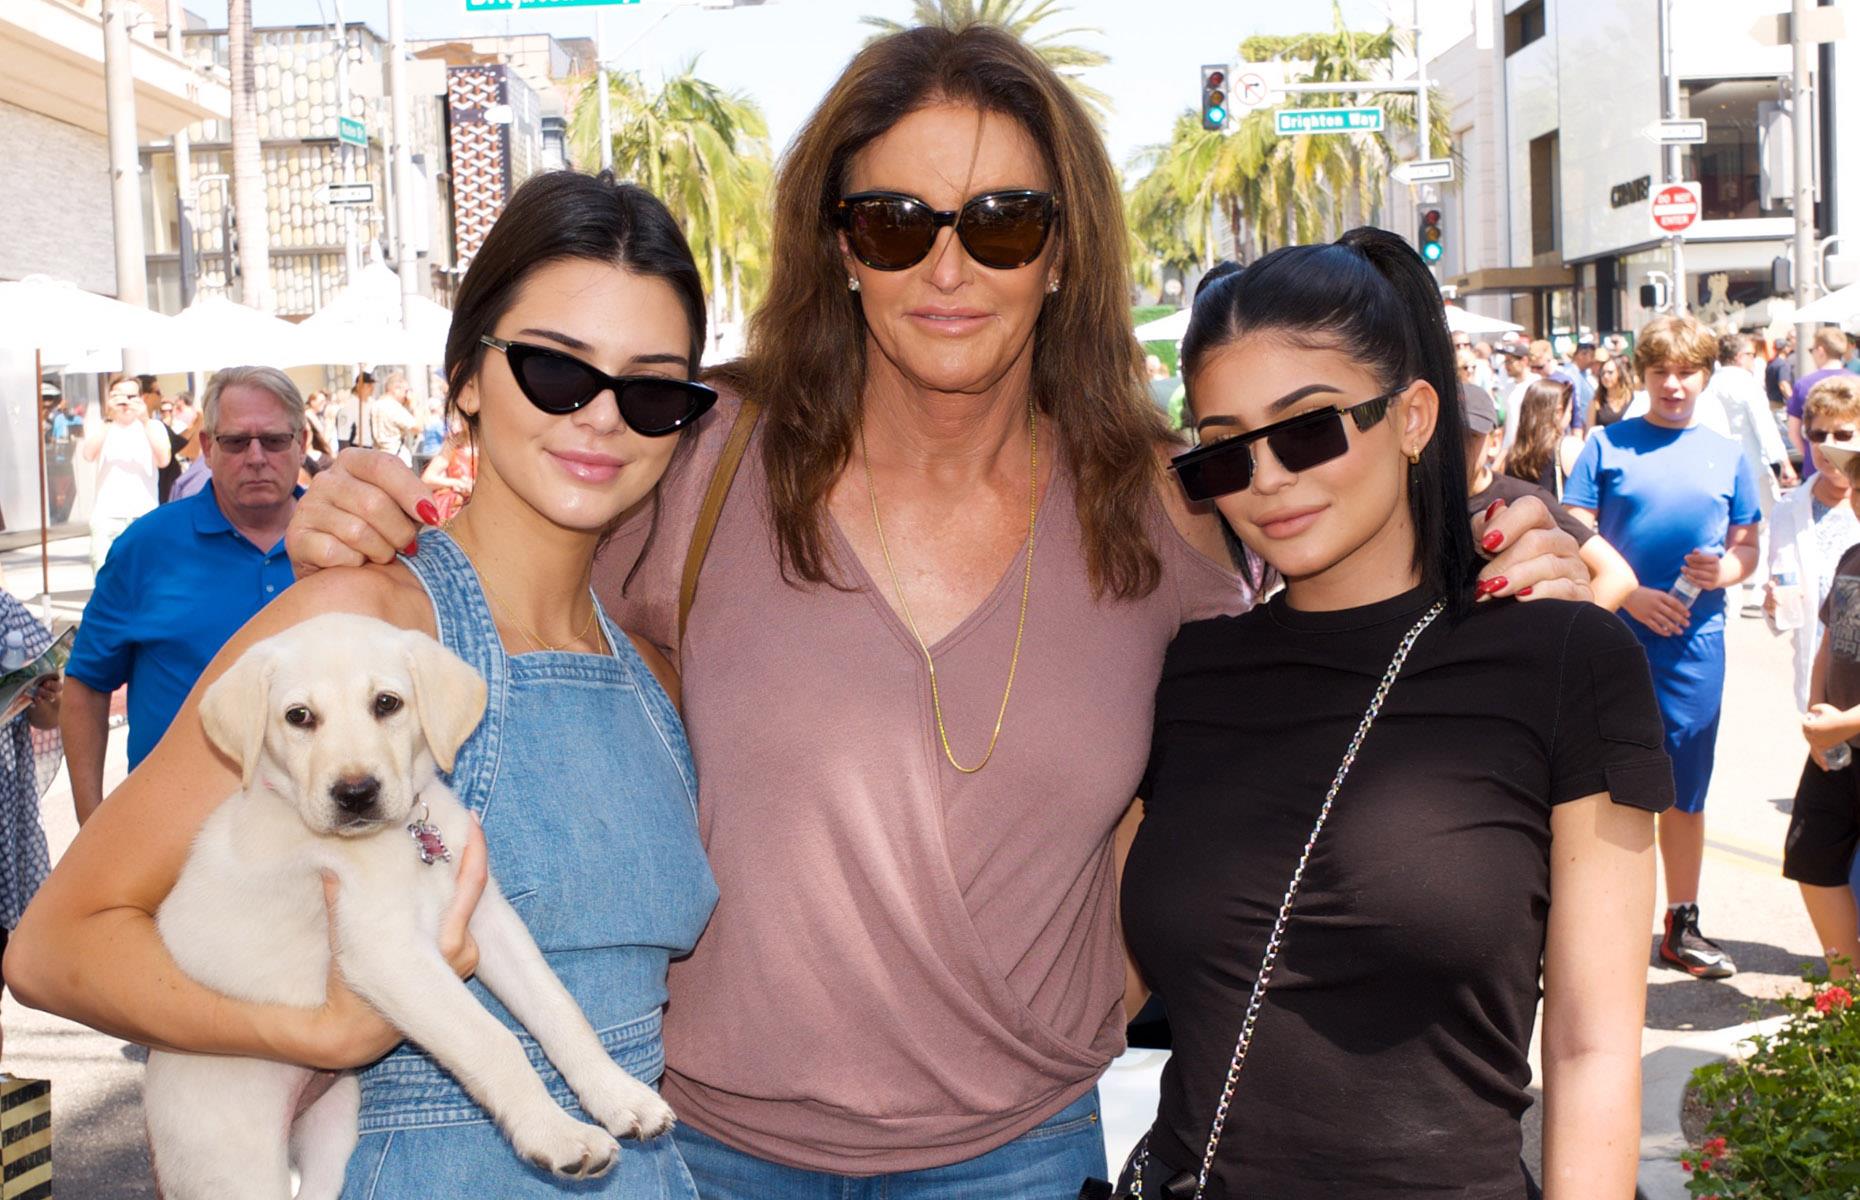 17. Caitlyn Jenner might cut her daughters from her will